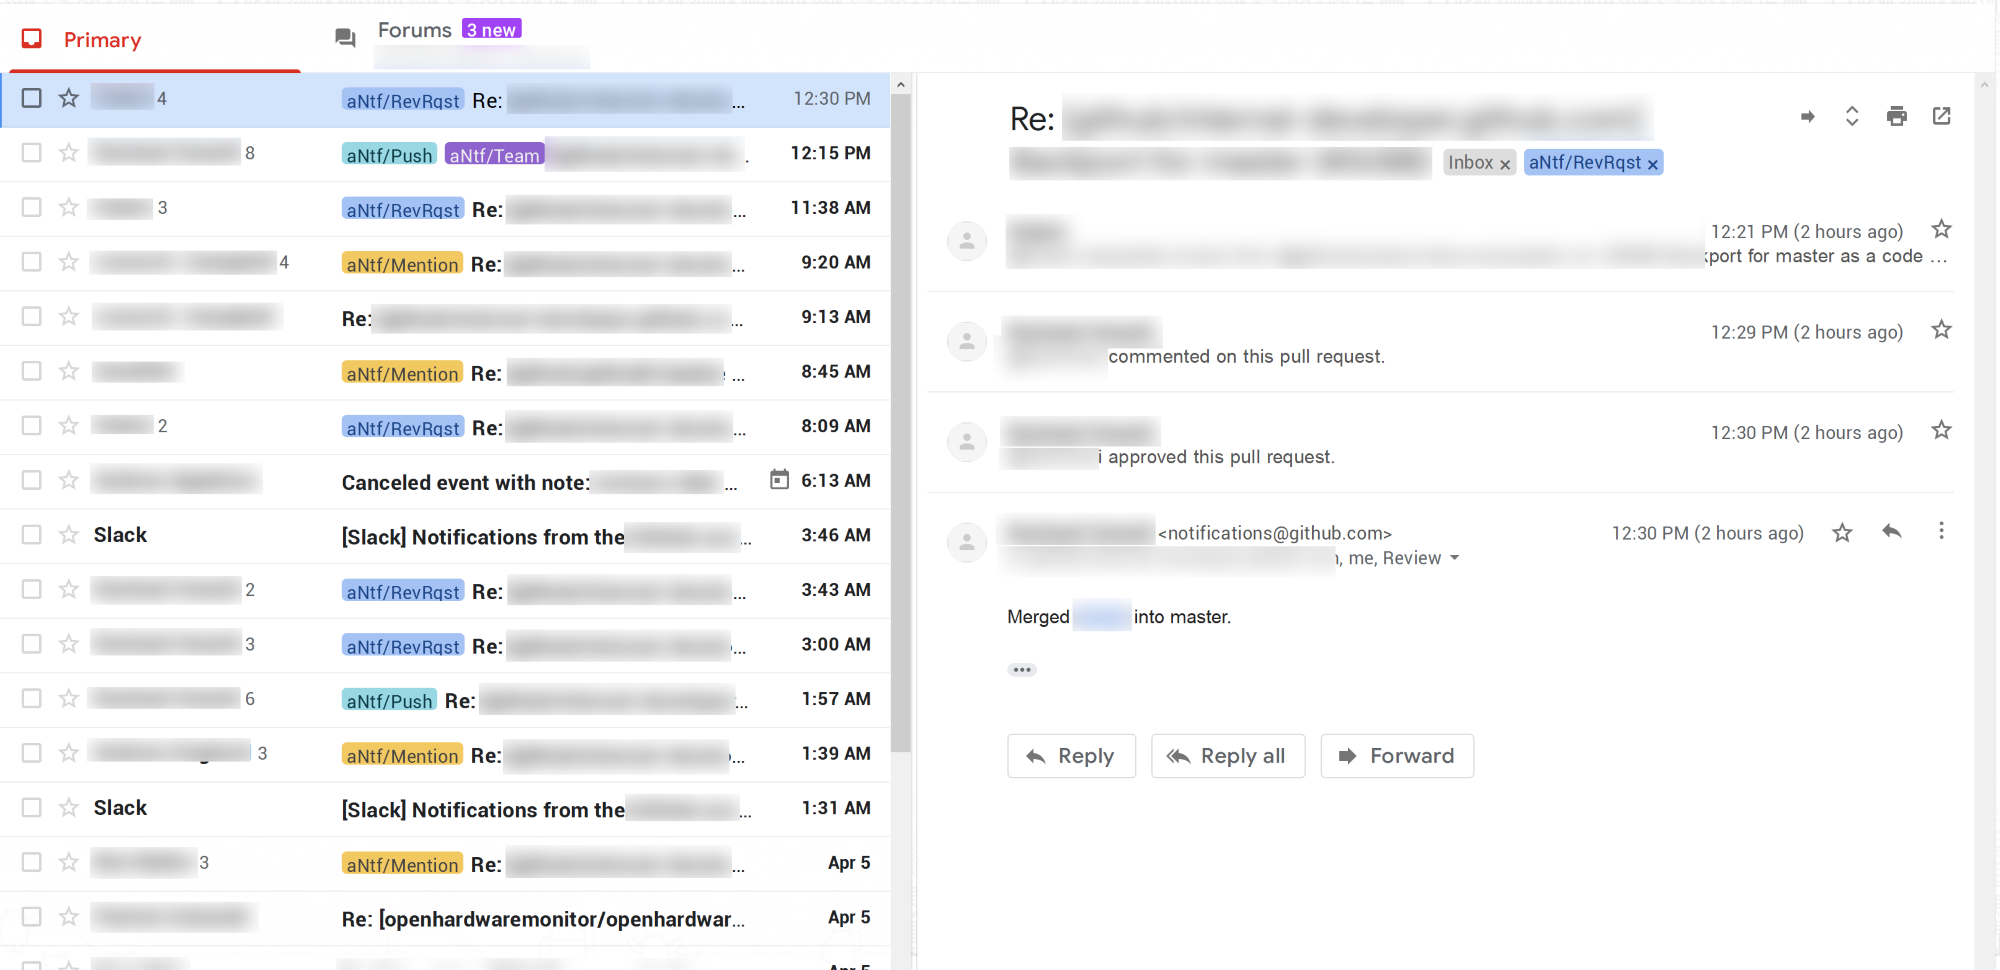 Gmail interface as the default